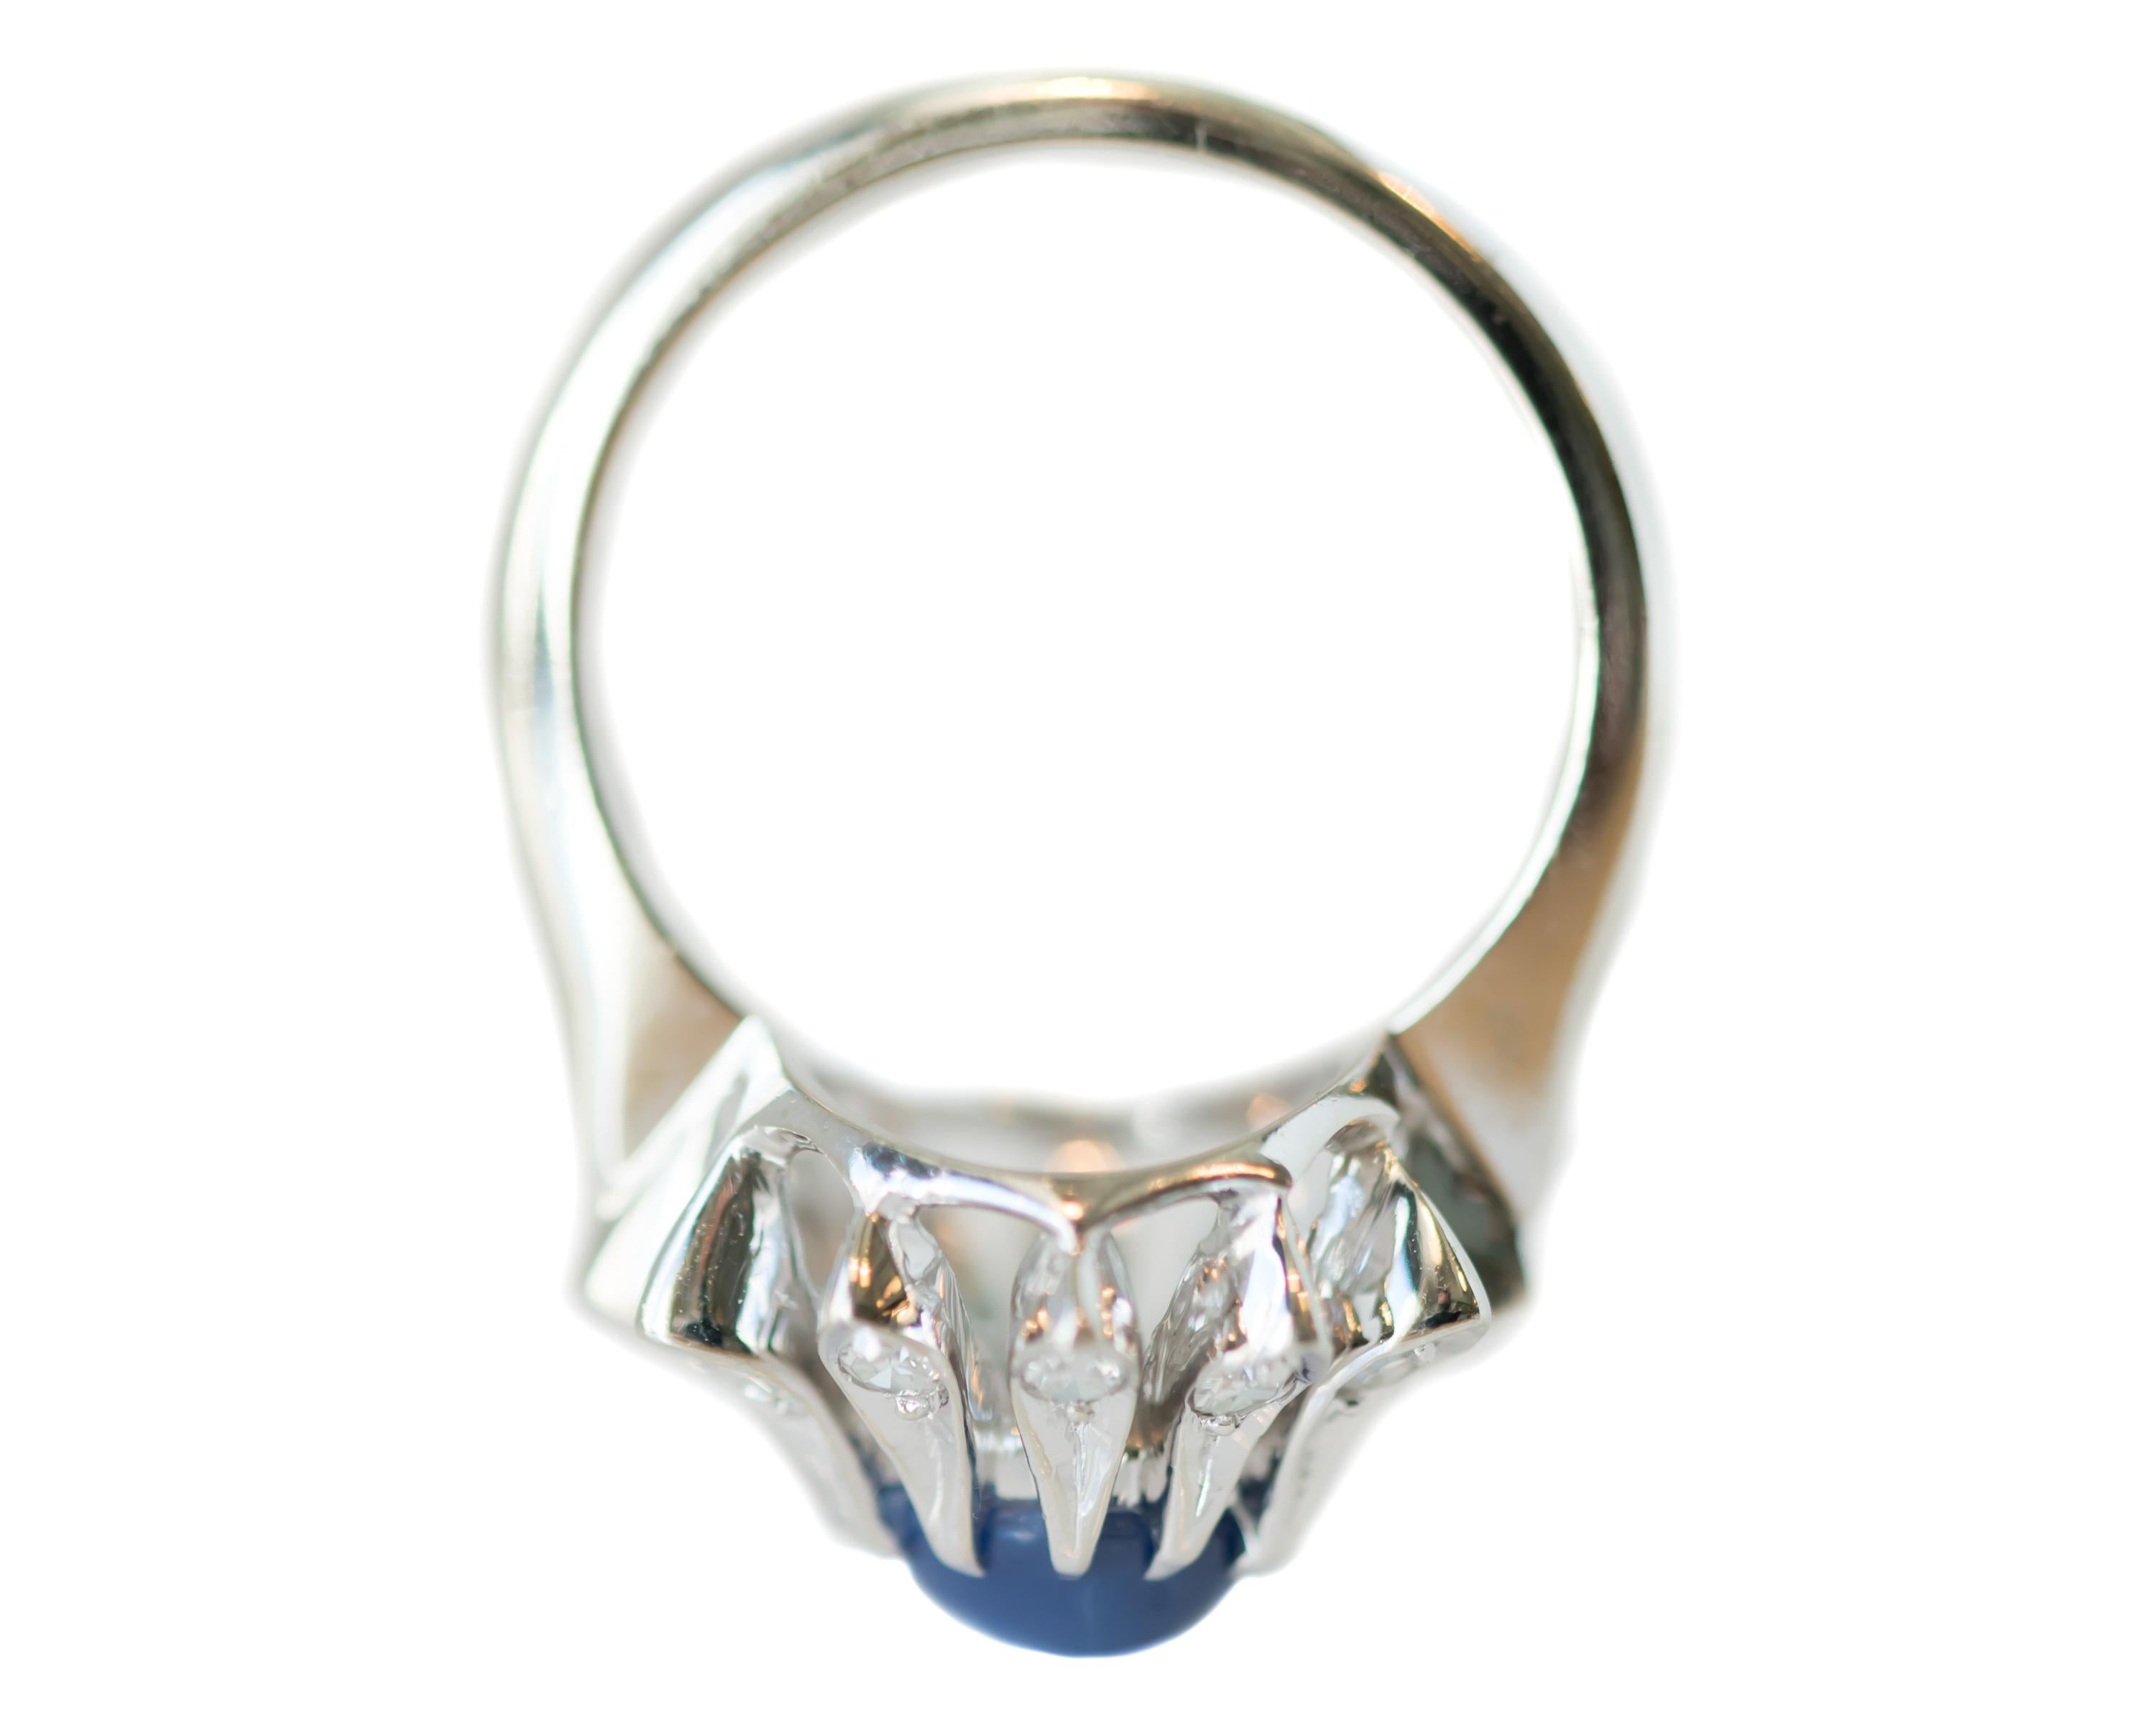 Women's 1950s 1 Carat Blue Star Sapphire, Diamond and 14 Karat White Gold Floral Ring For Sale